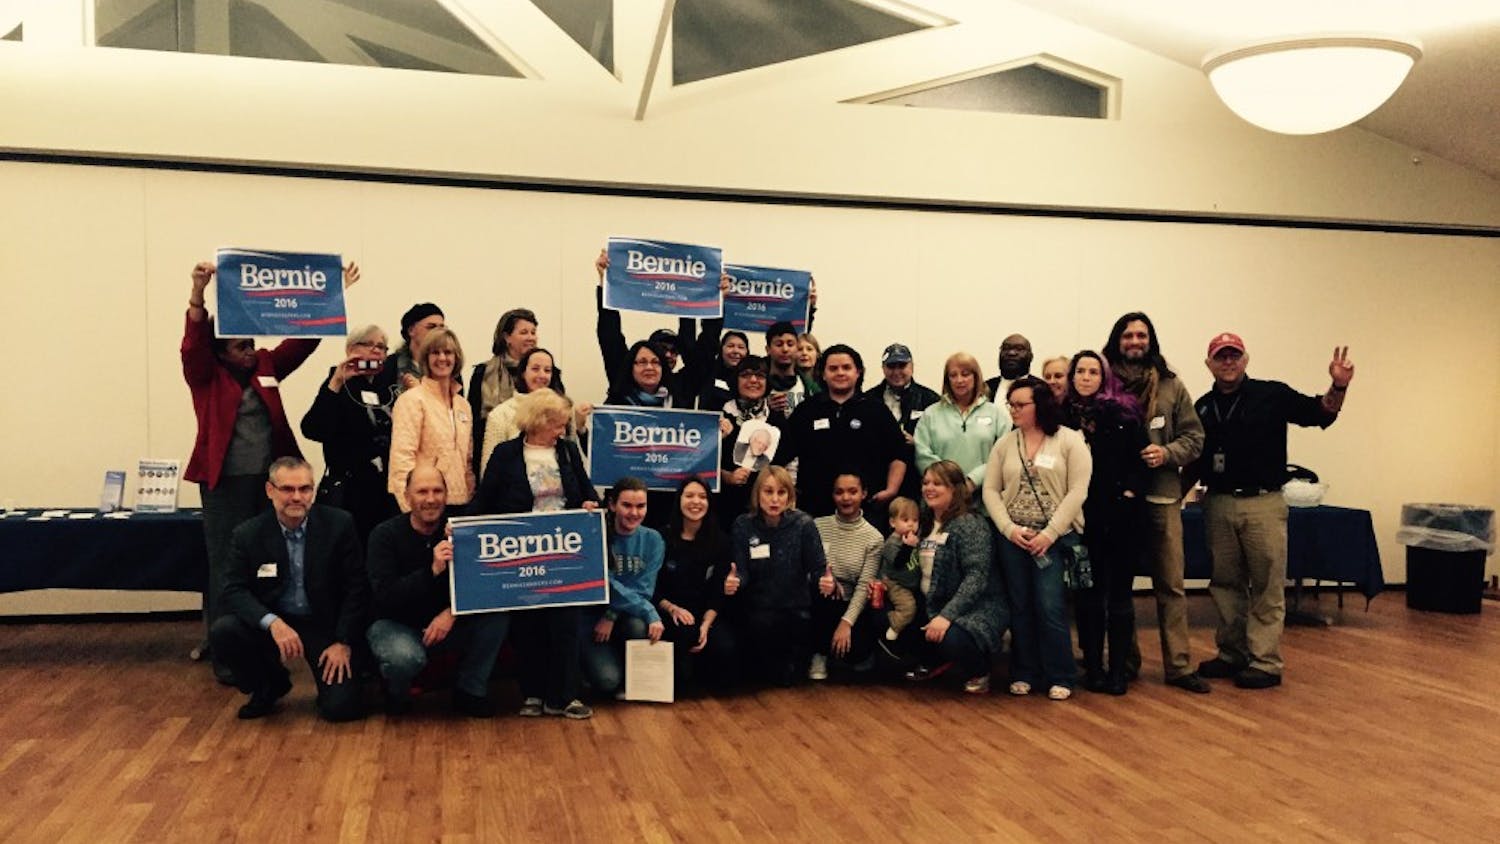 Women (and men)&nbsp;argued that&nbsp;Bernie Sanders will fight for women's rights at the&nbsp;Women for Bernie meet-up, which&nbsp;was hosted at the Lourie Center on&nbsp;Wednesday night.